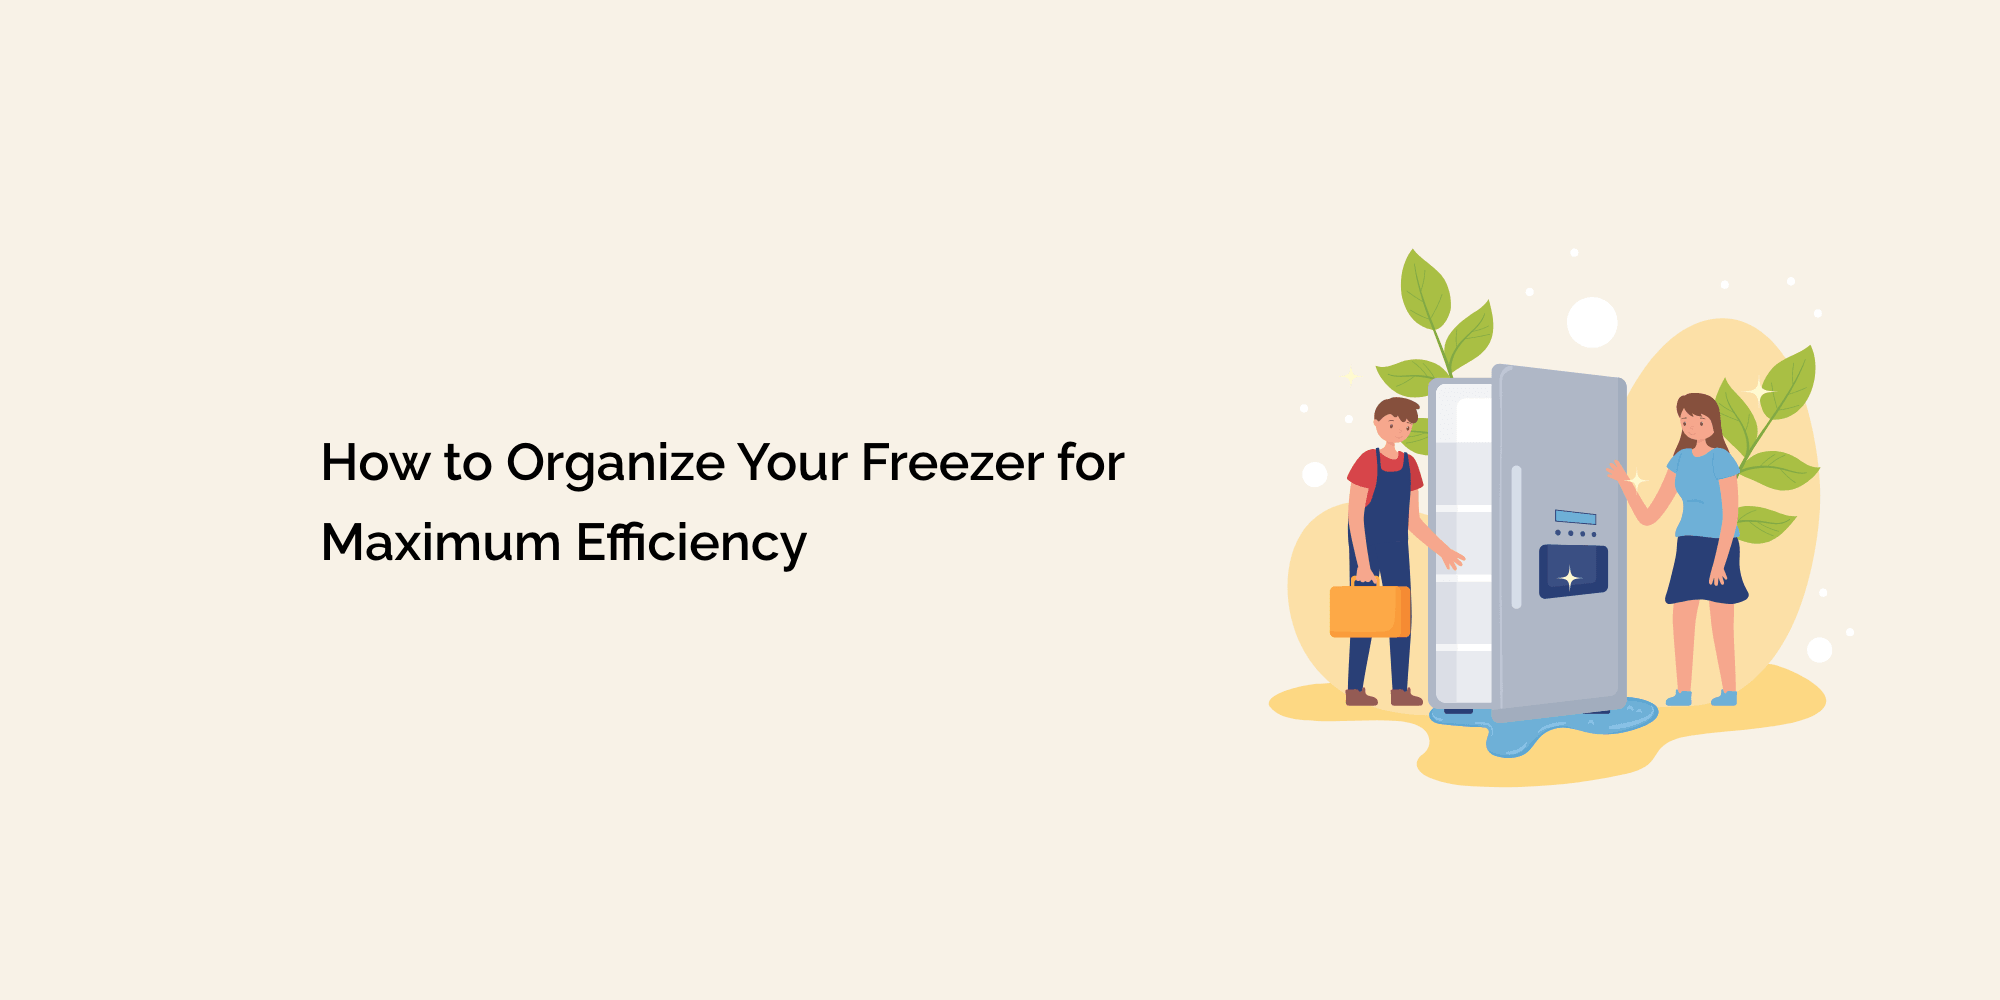 How to Organize Your Freezer for Maximum Efficiency